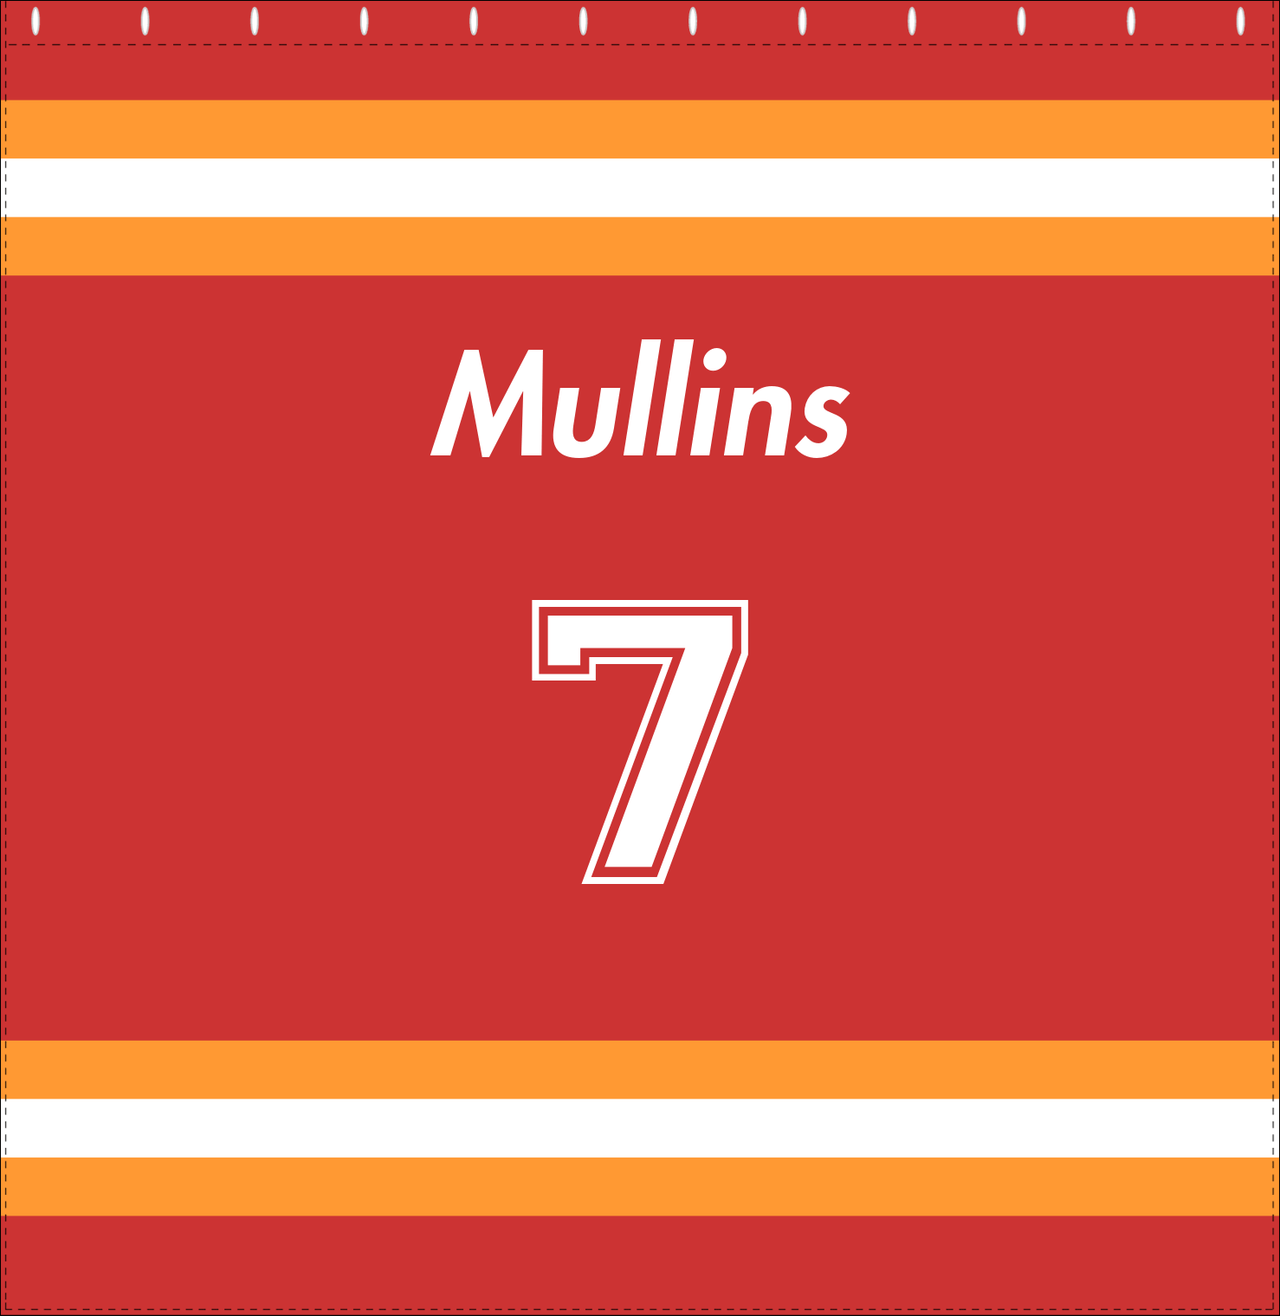 Personalized Jersey Number Shower Curtain - Red & Orange - Single Stripe - Decorate View